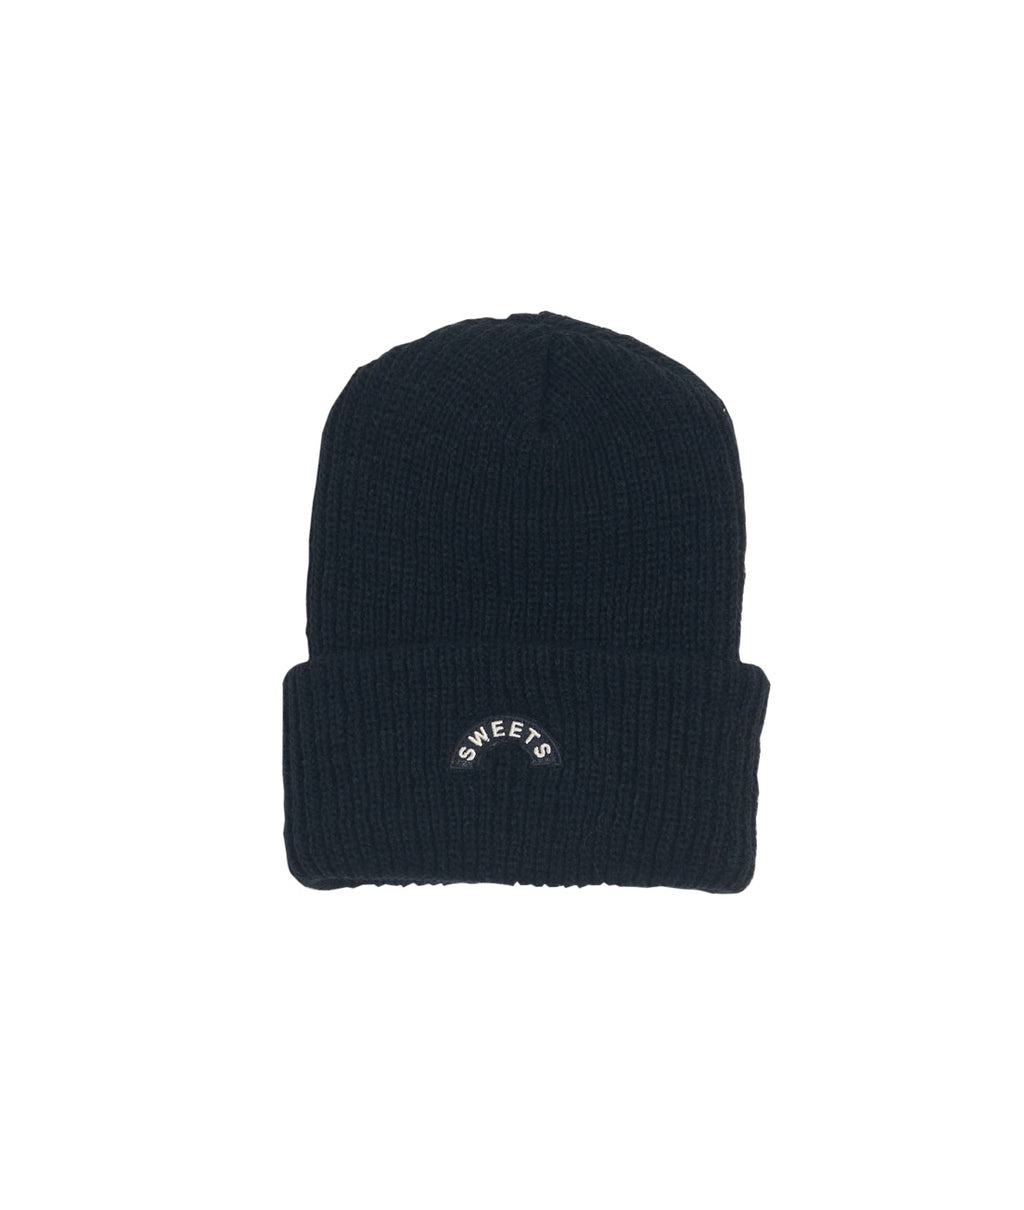 SWEETS KNIT BEANIE - BLACK – SWEETS LOS ANGELES 2021 ALL RIGHTS RESERVED